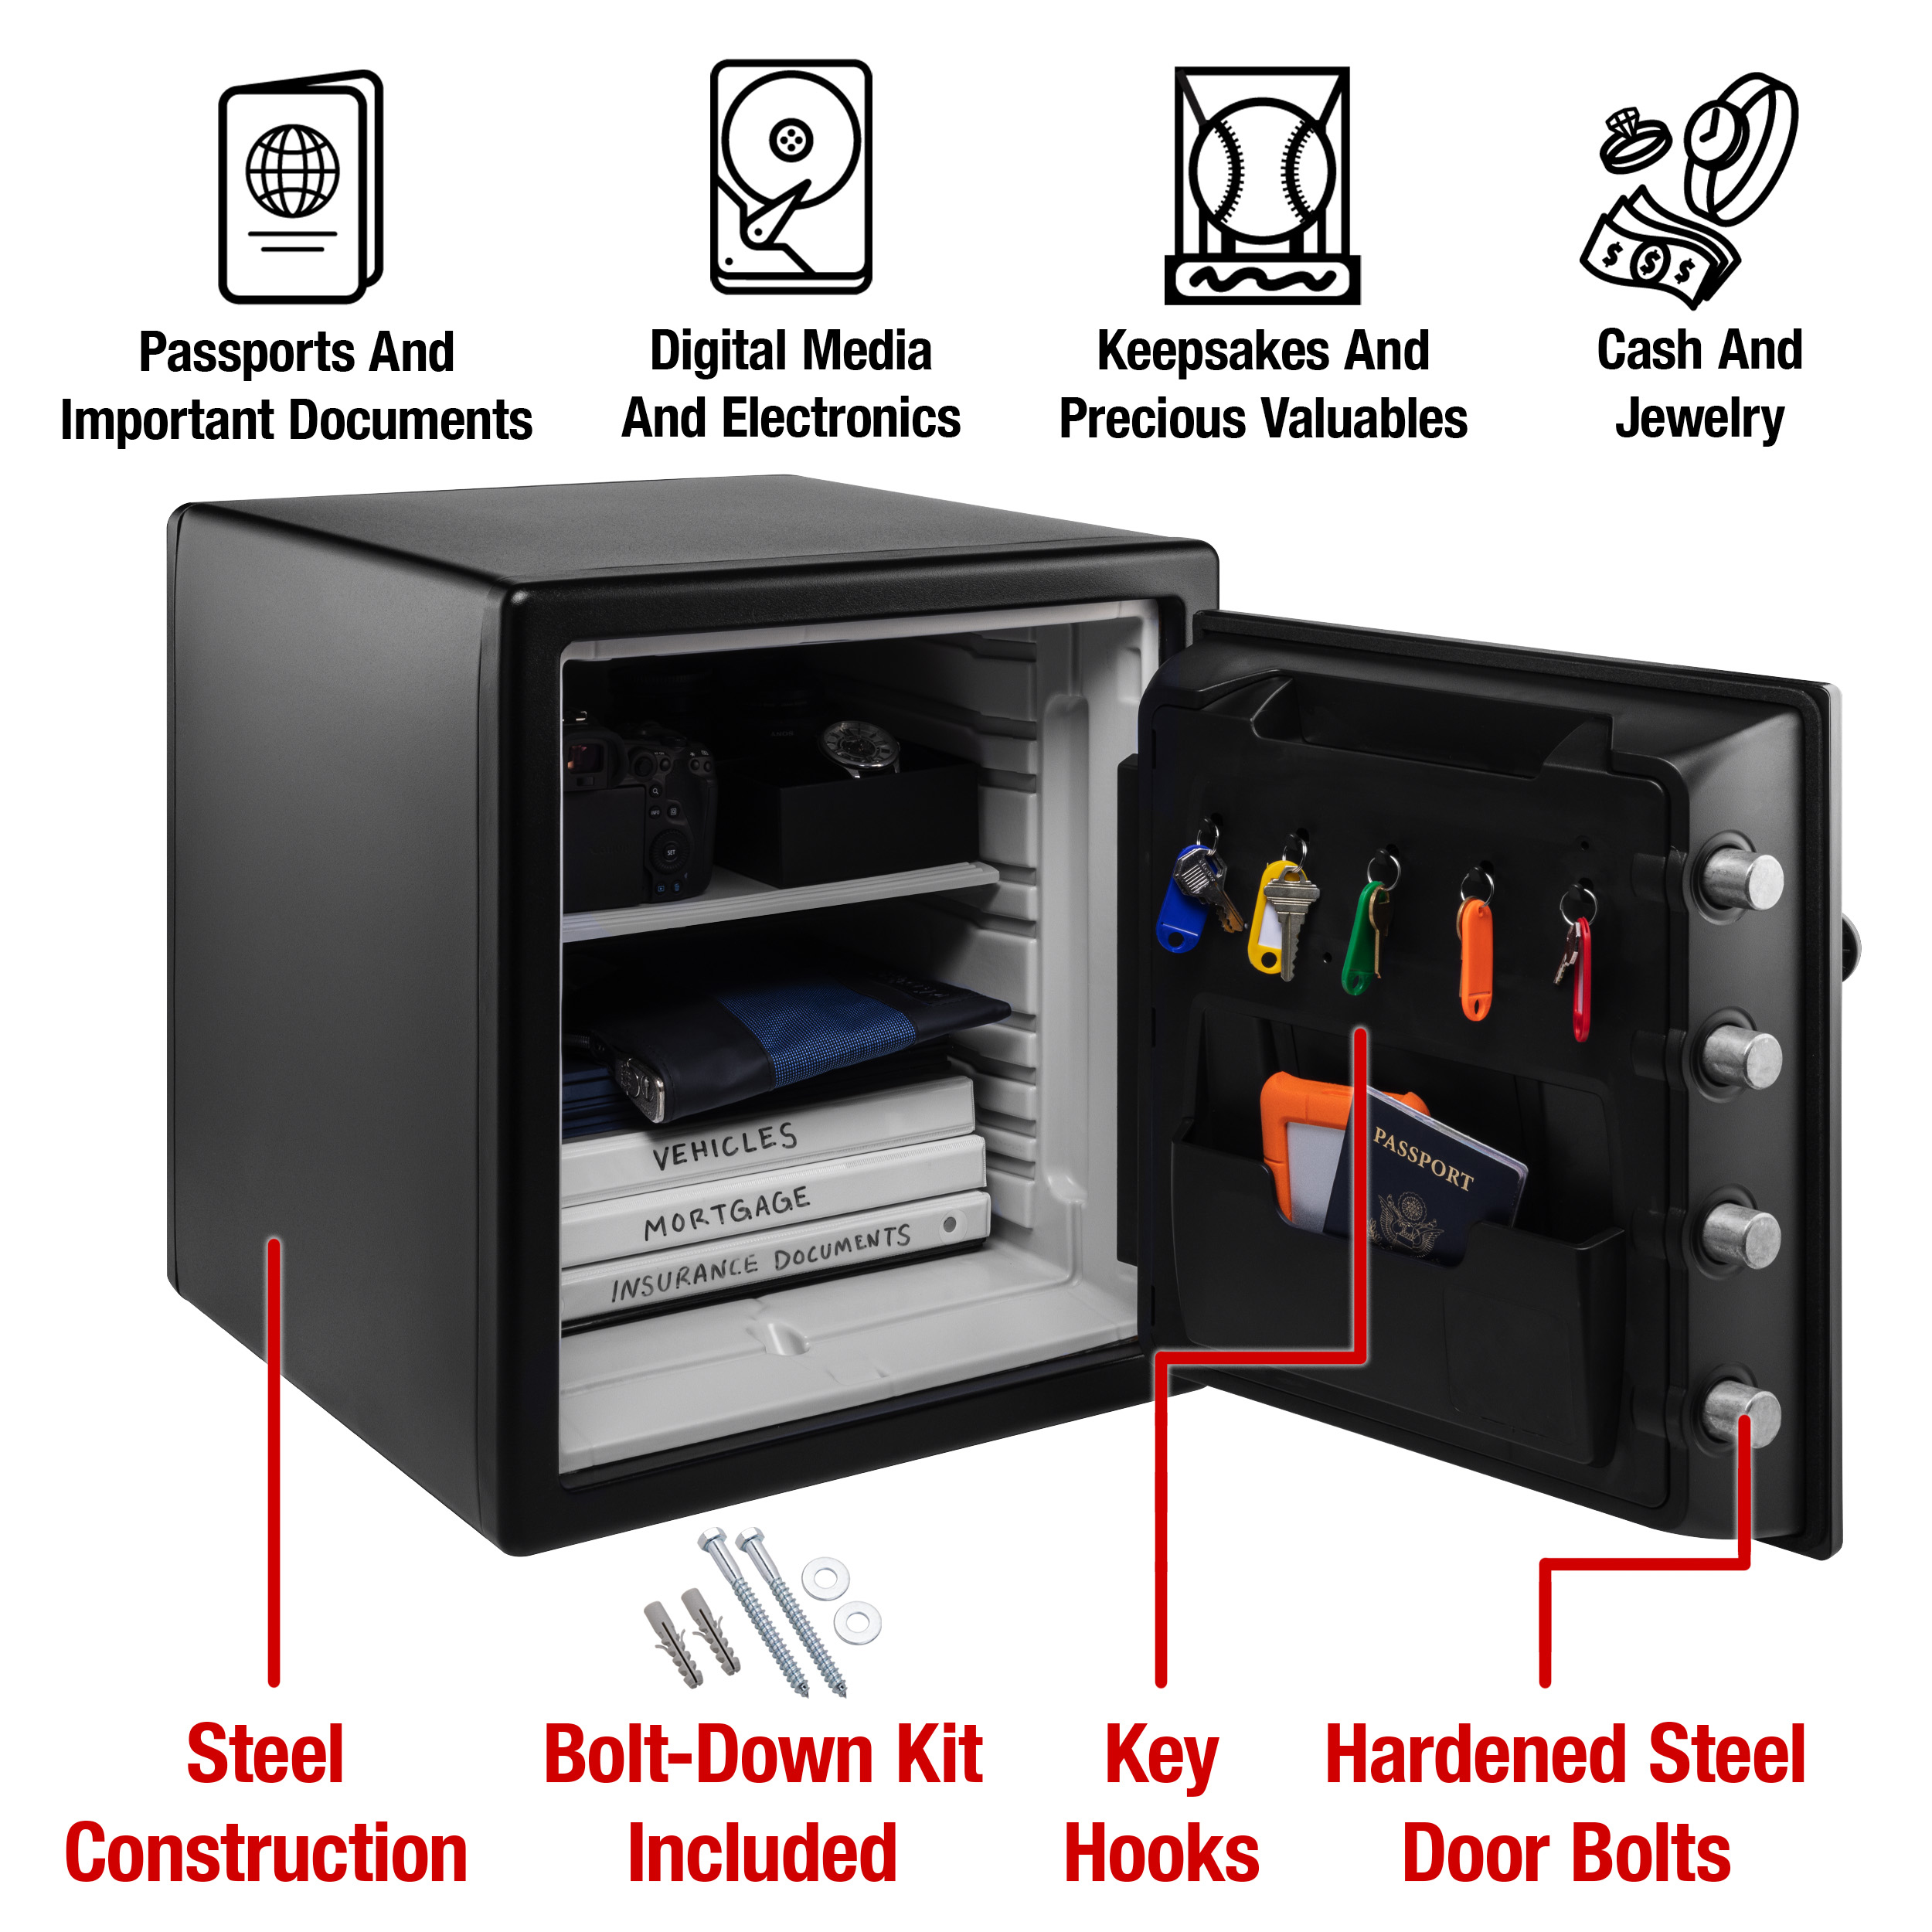 SentrySafe SFW123CS Fire-Resistant Safe and Waterproof Safe with Dial Combination Lock, 1.23 cu. ft. - image 3 of 7